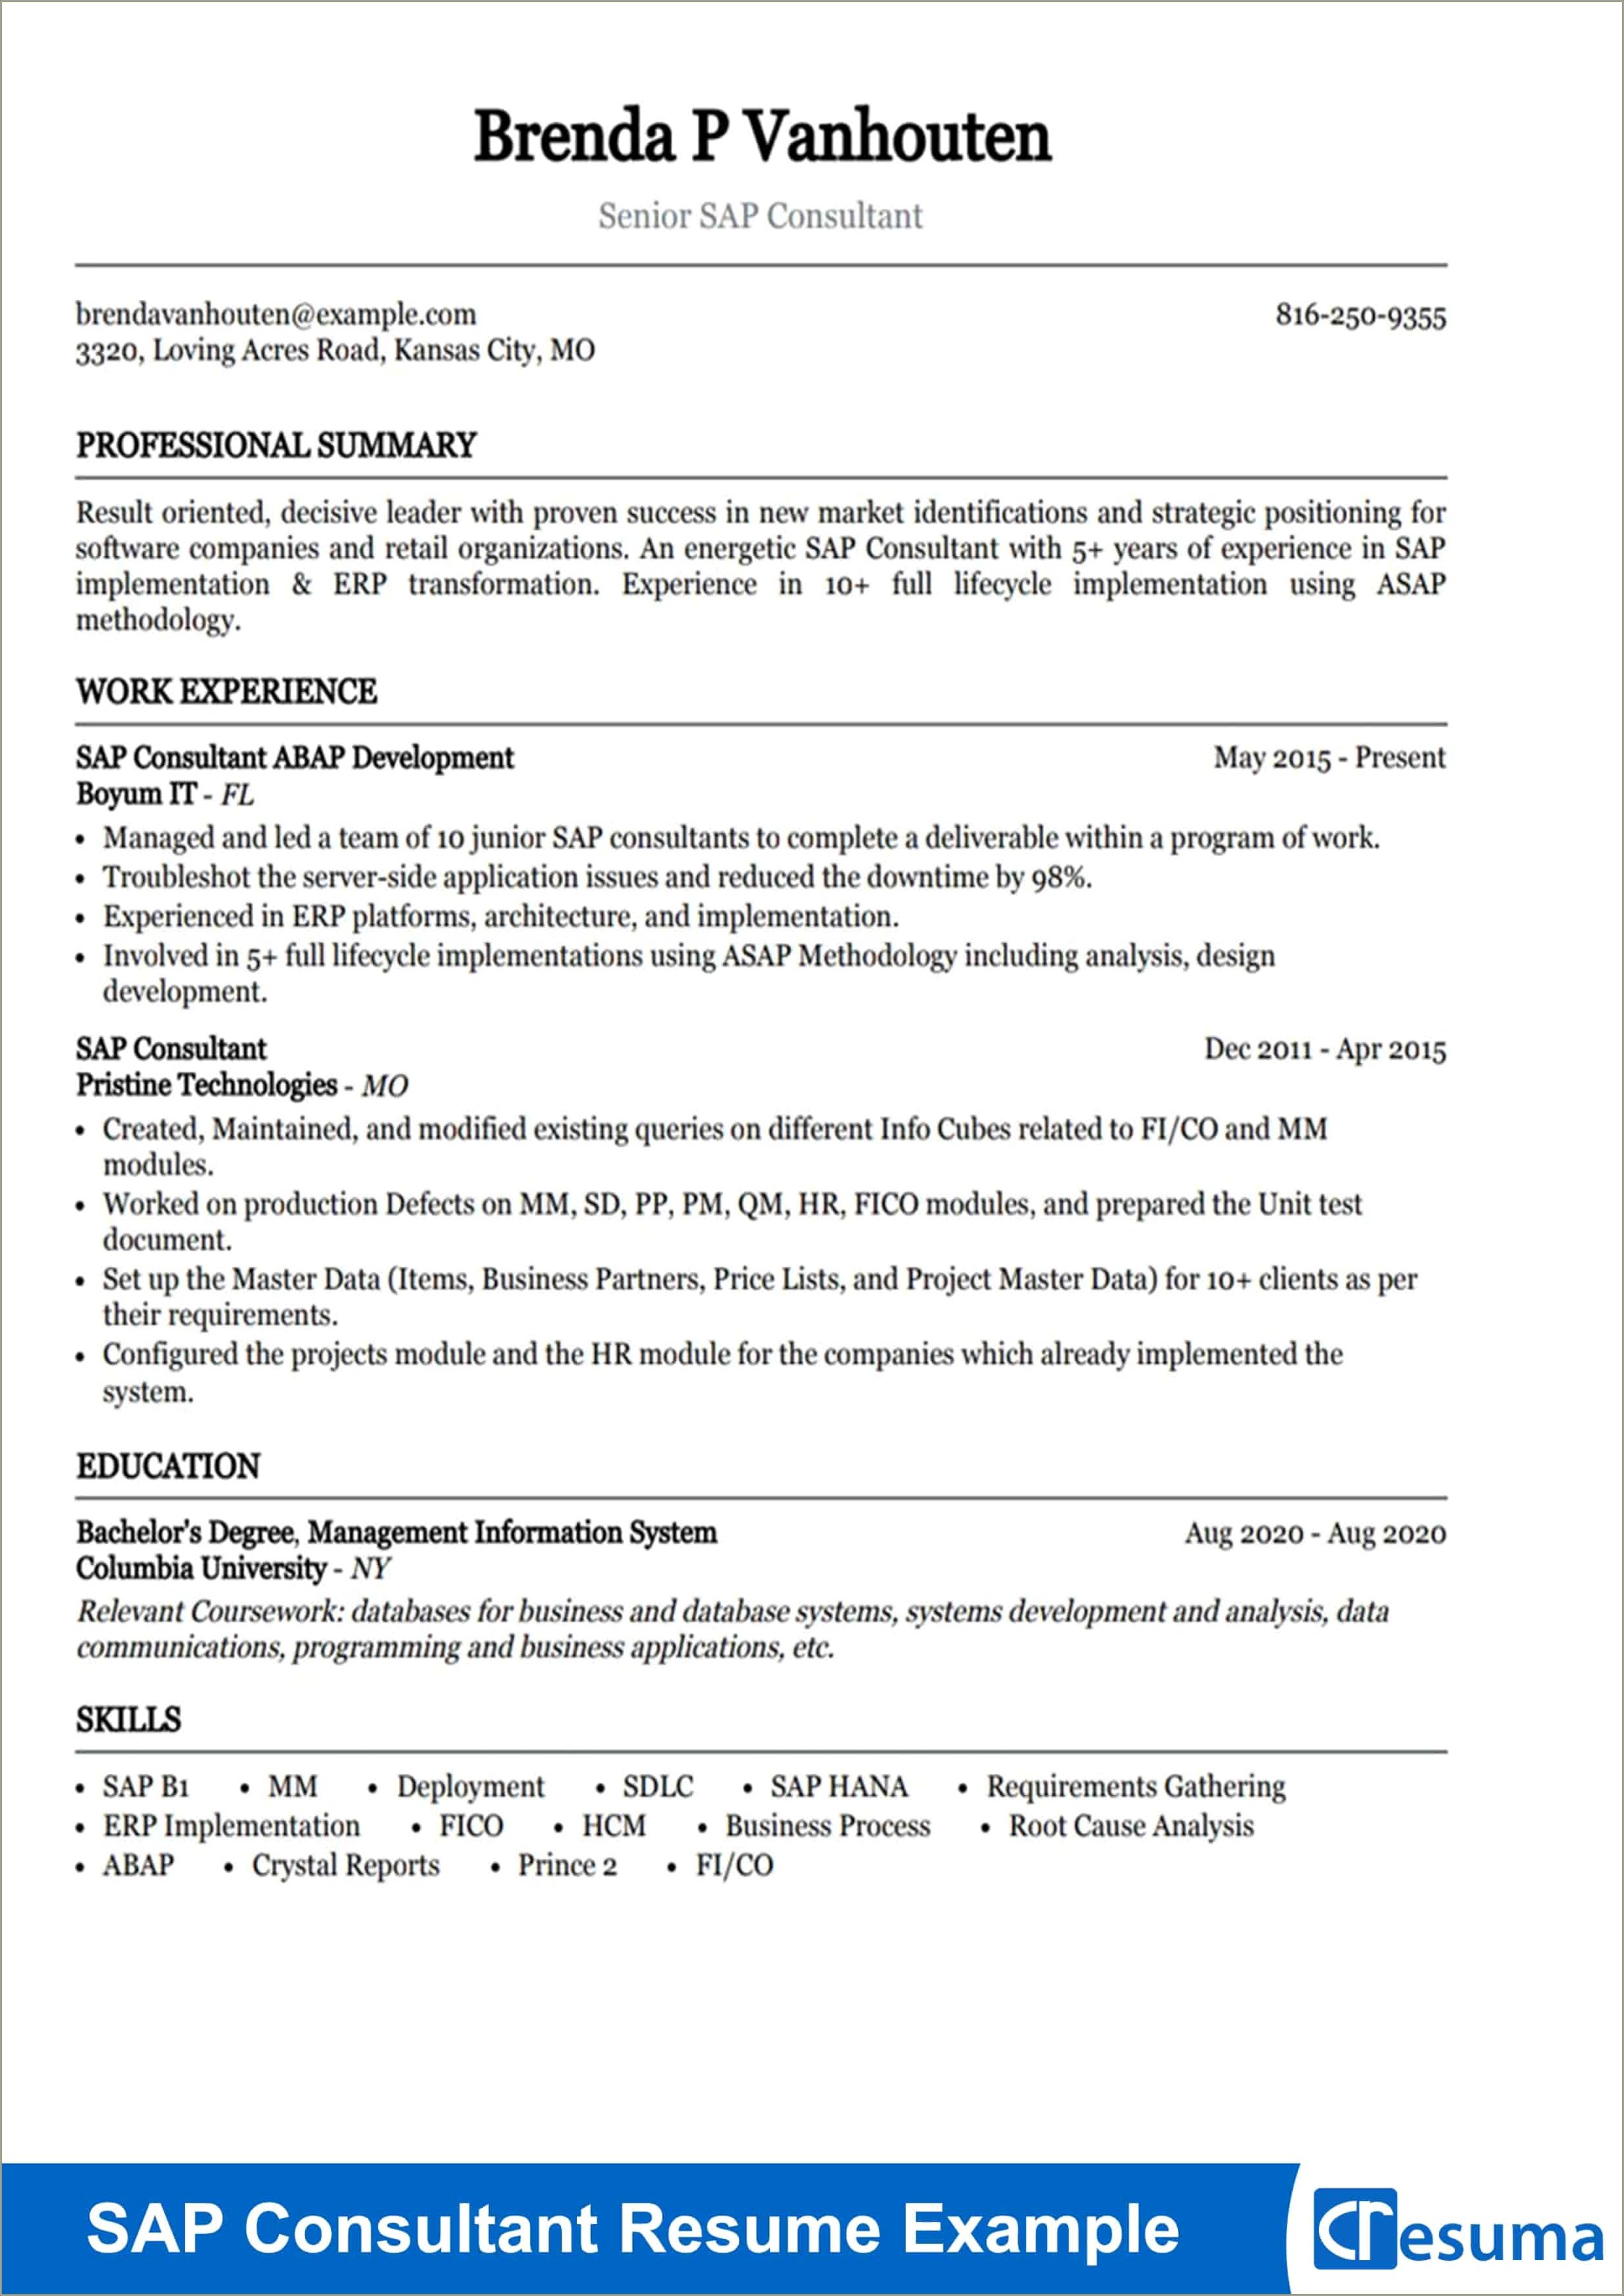 Sap Sd Consultant 2 Years Experience Resume